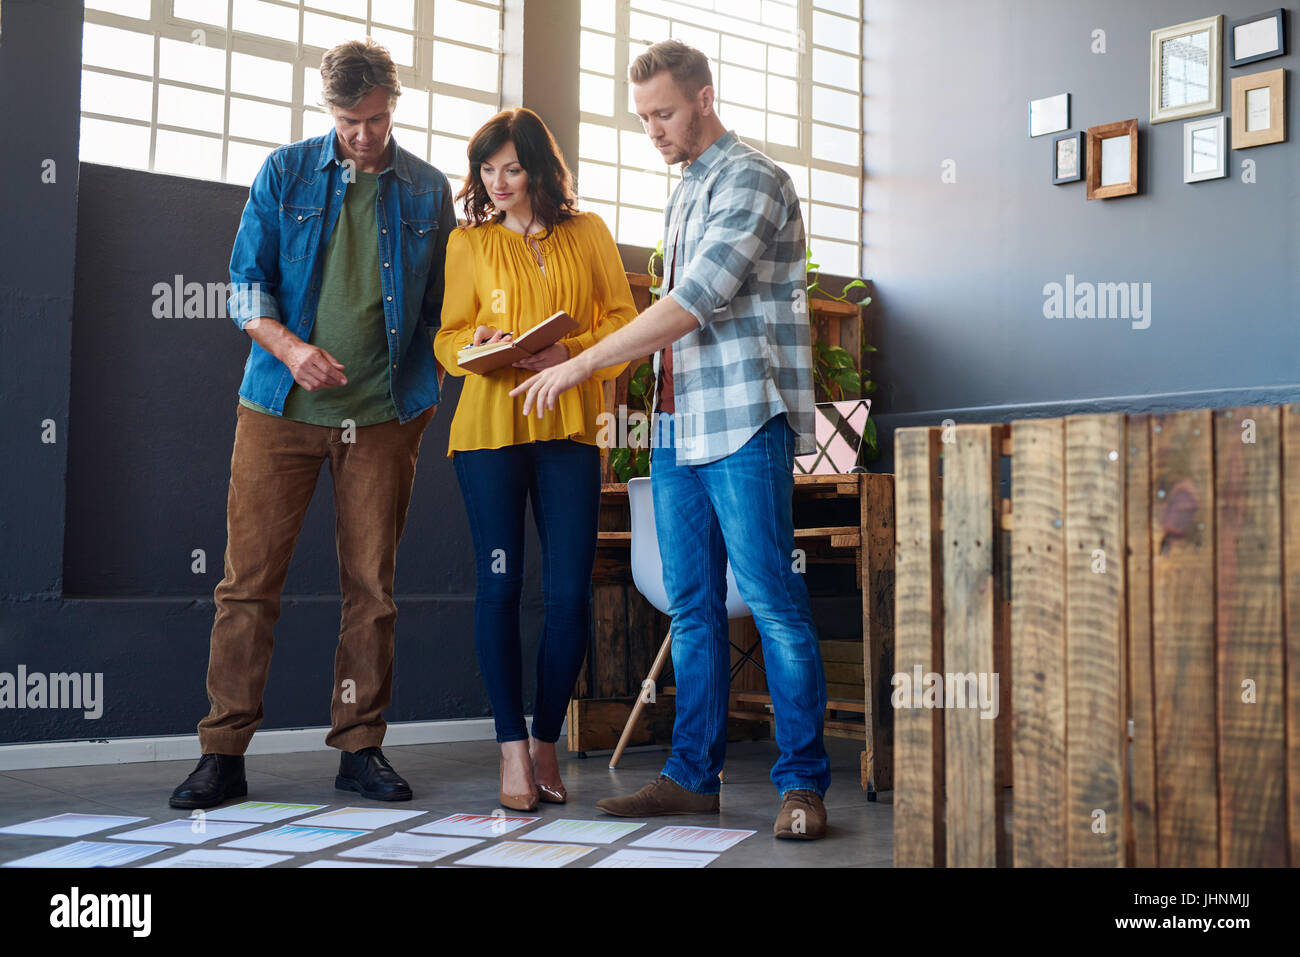 Colleagues talking together over papers lying on an office floor Stock Photo